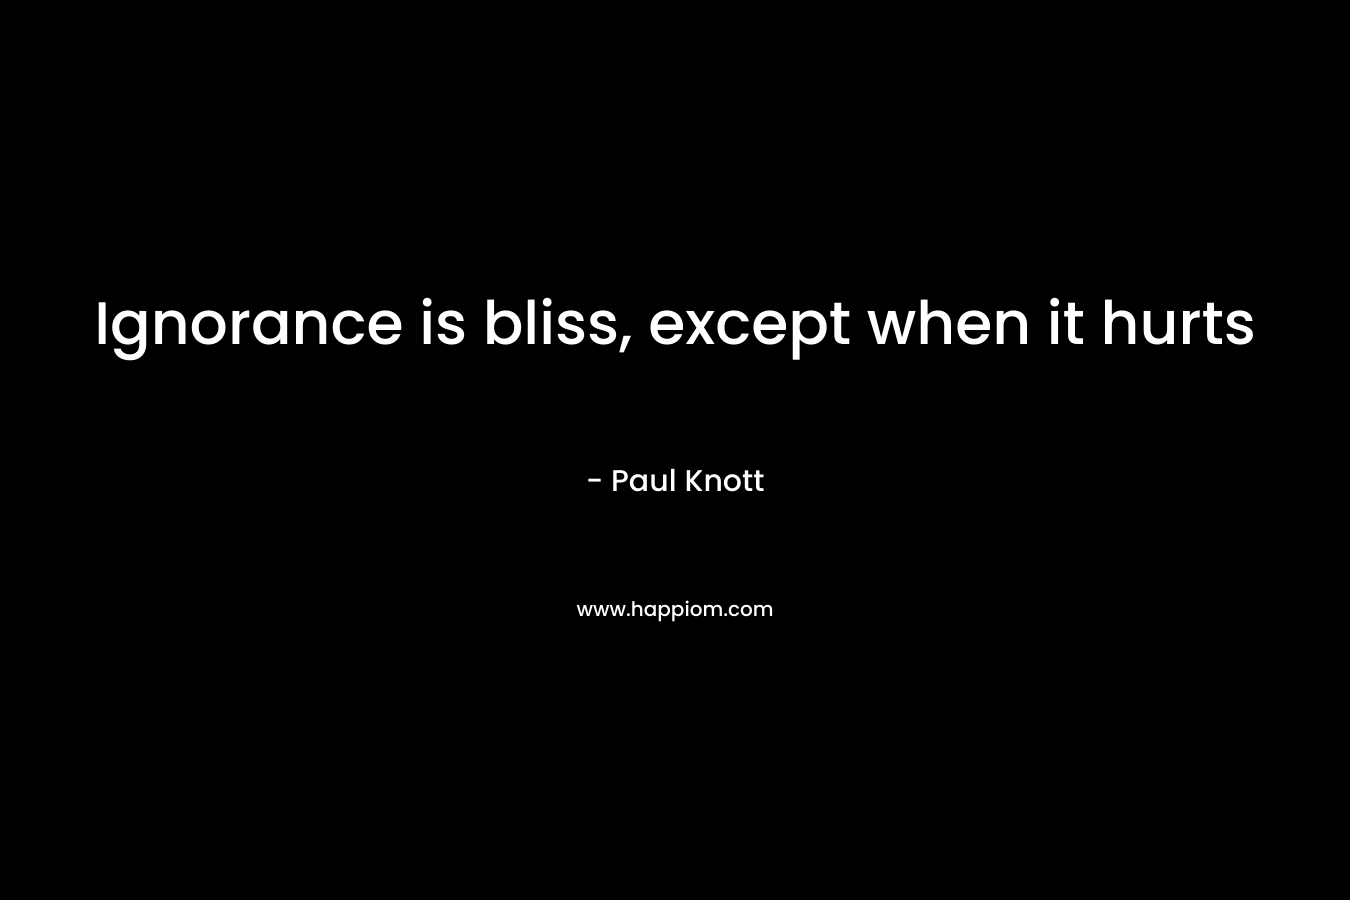 Ignorance is bliss, except when it hurts – Paul Knott